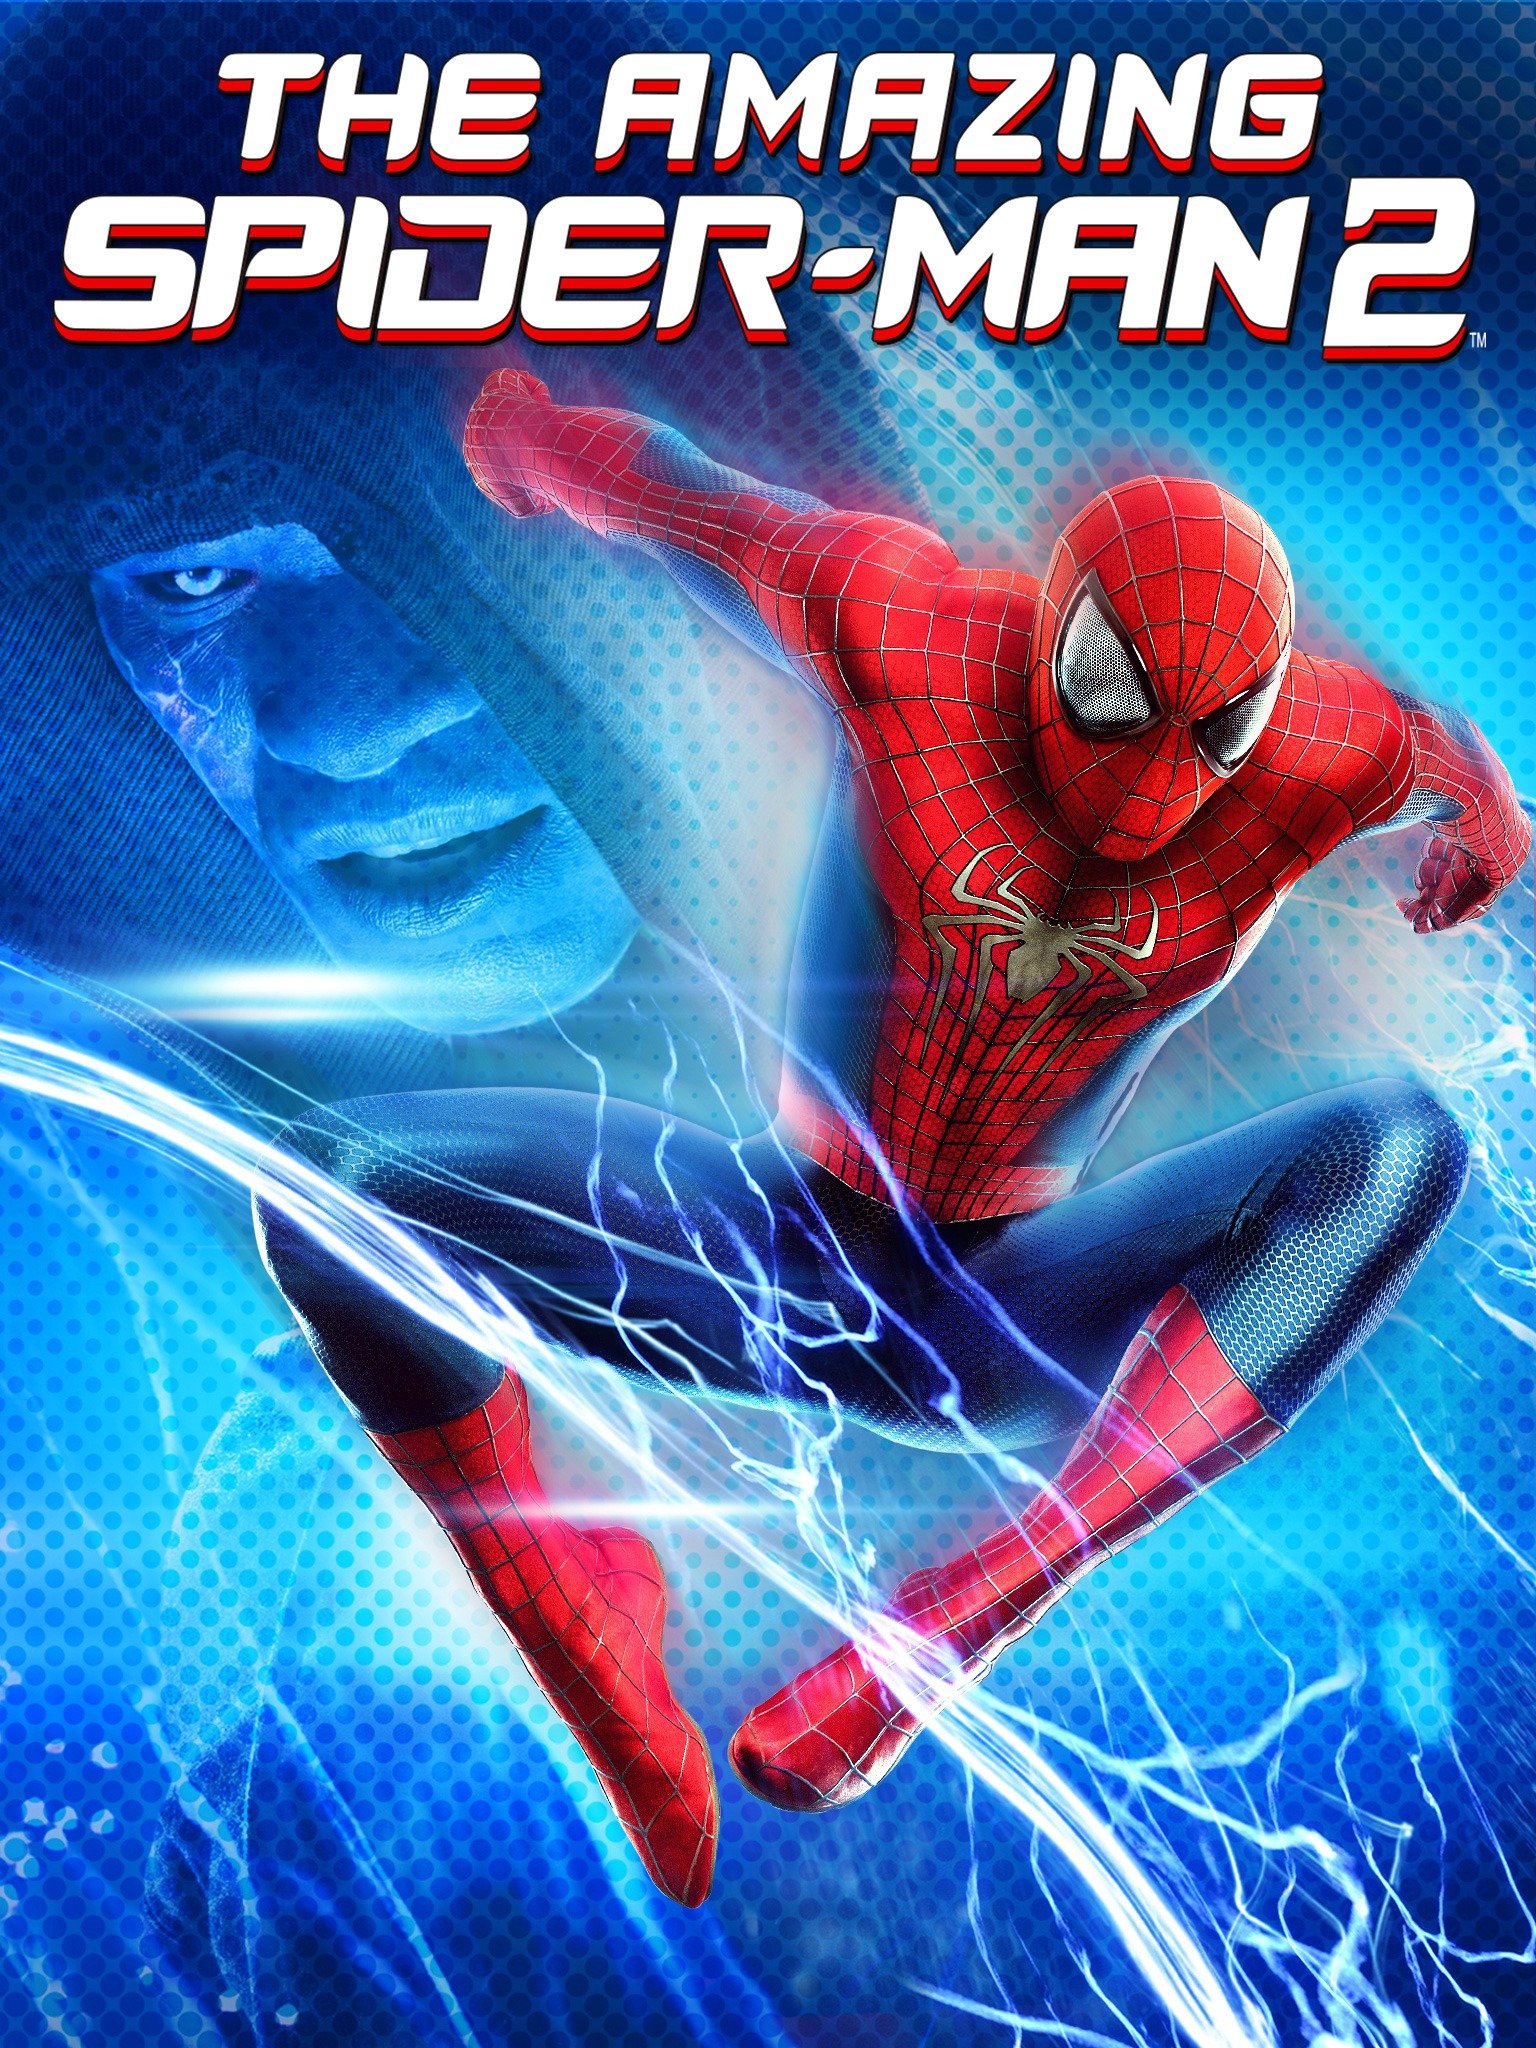 The Amazing Spider Man 2 2014 Rotten Tomatoes